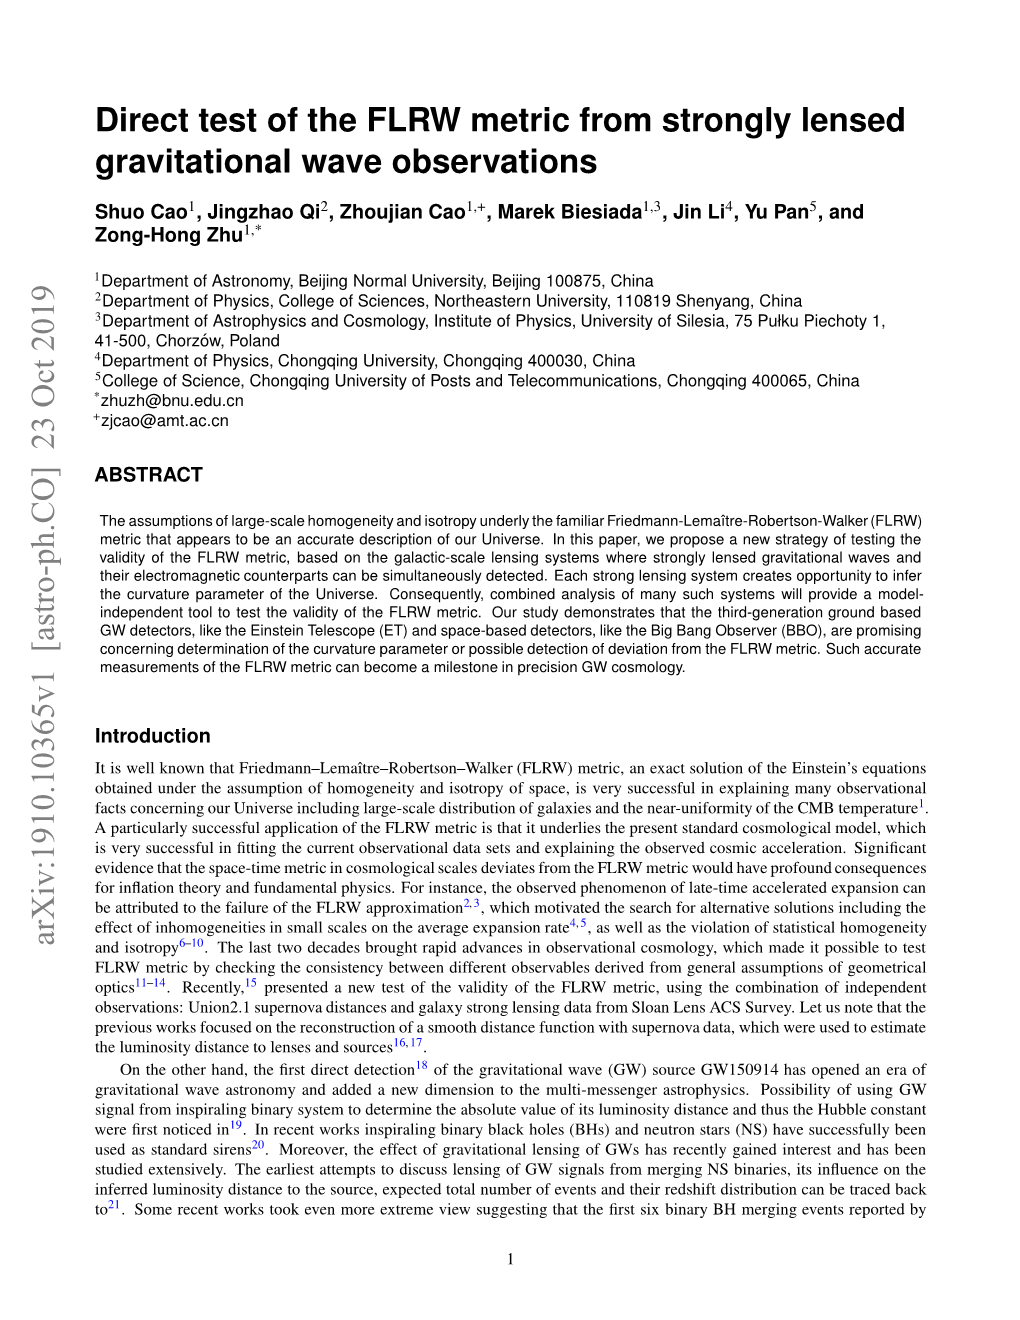 Direct Test of the FLRW Metric from Strongly Lensed Gravitational Wave